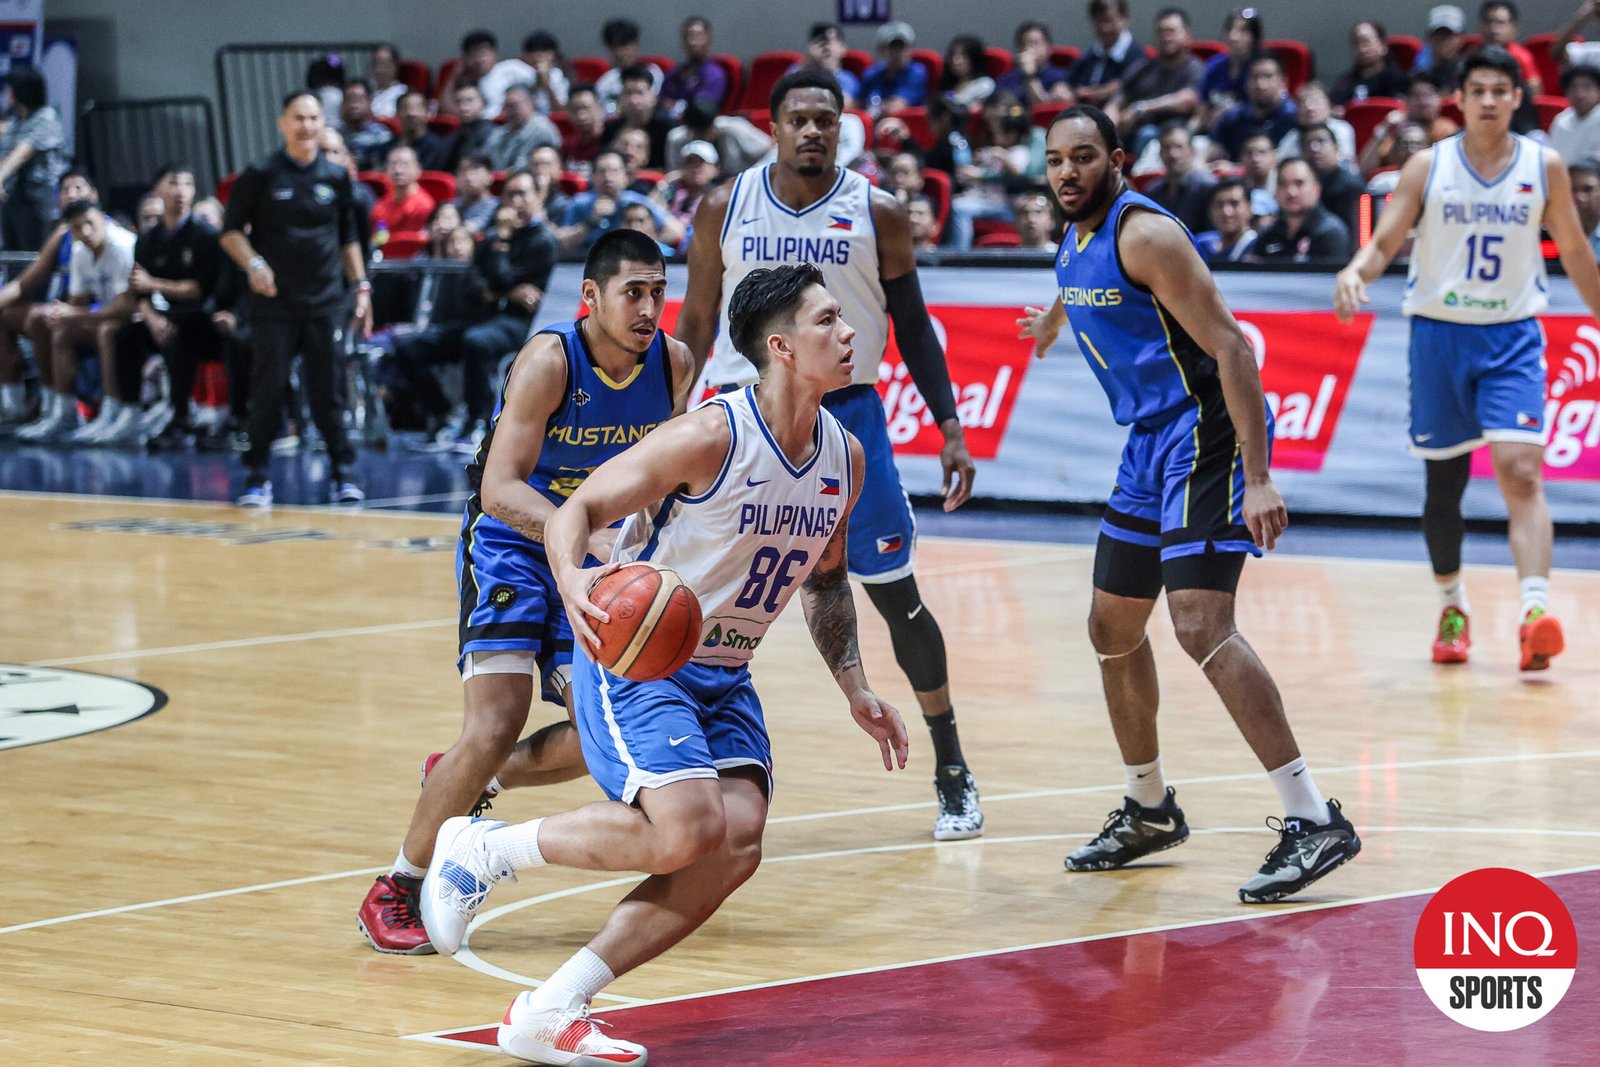 Gilas Pilipinas beats Taiwan Mustangs in tune-up before OQT